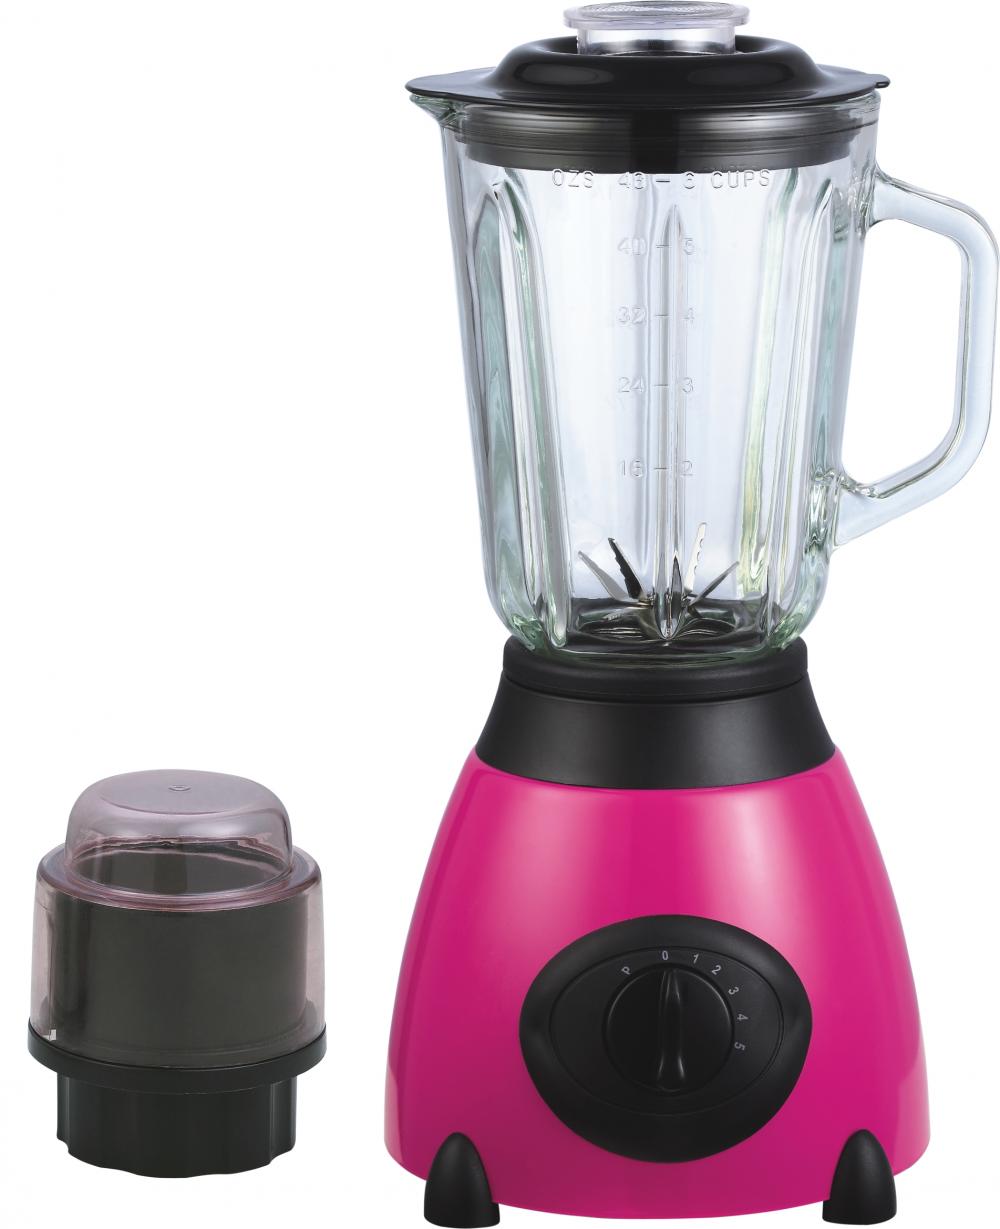 Stainless steel blender with glass jar